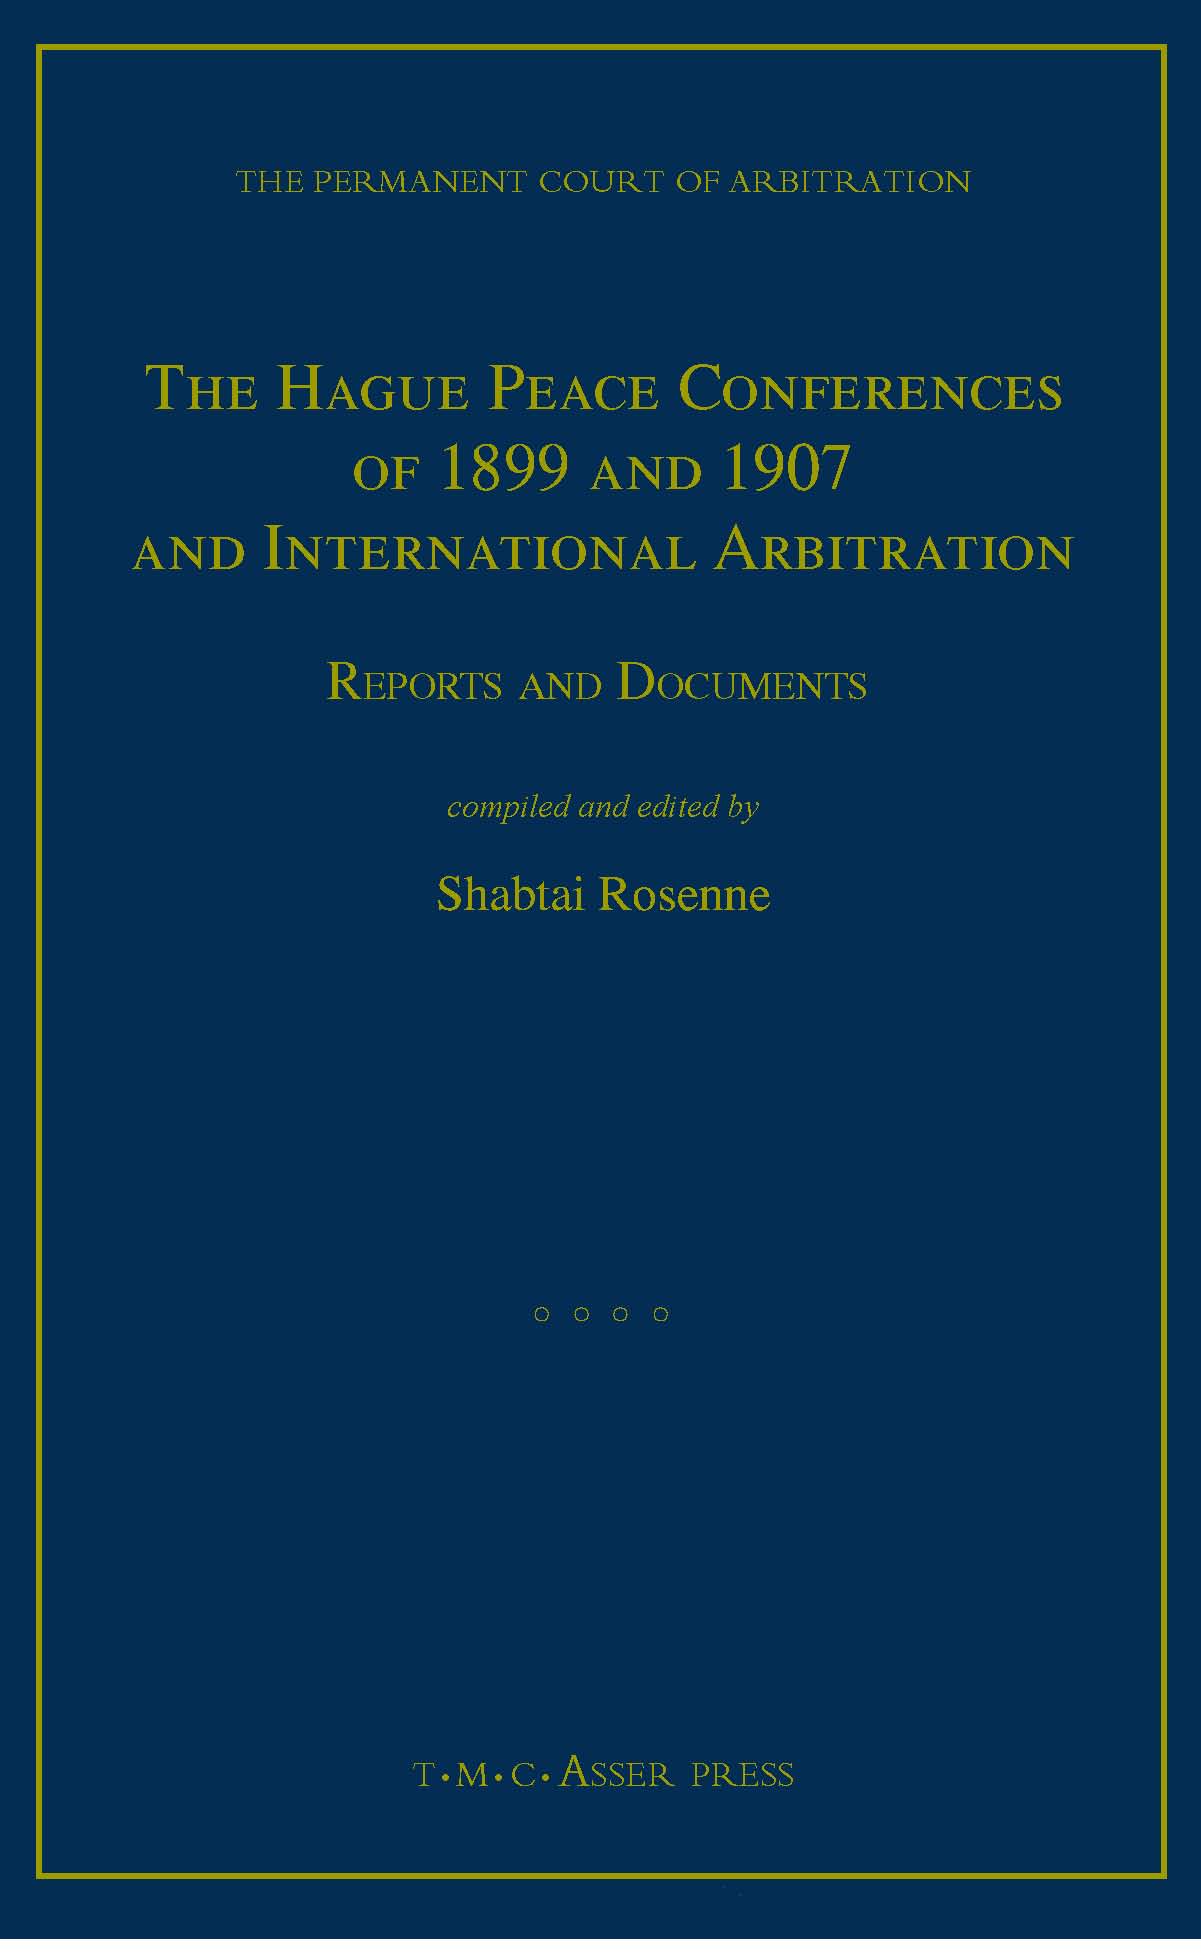 The Hague Peace Conferences of 1899 and 1907 and International Arbitration - Reports and Documents